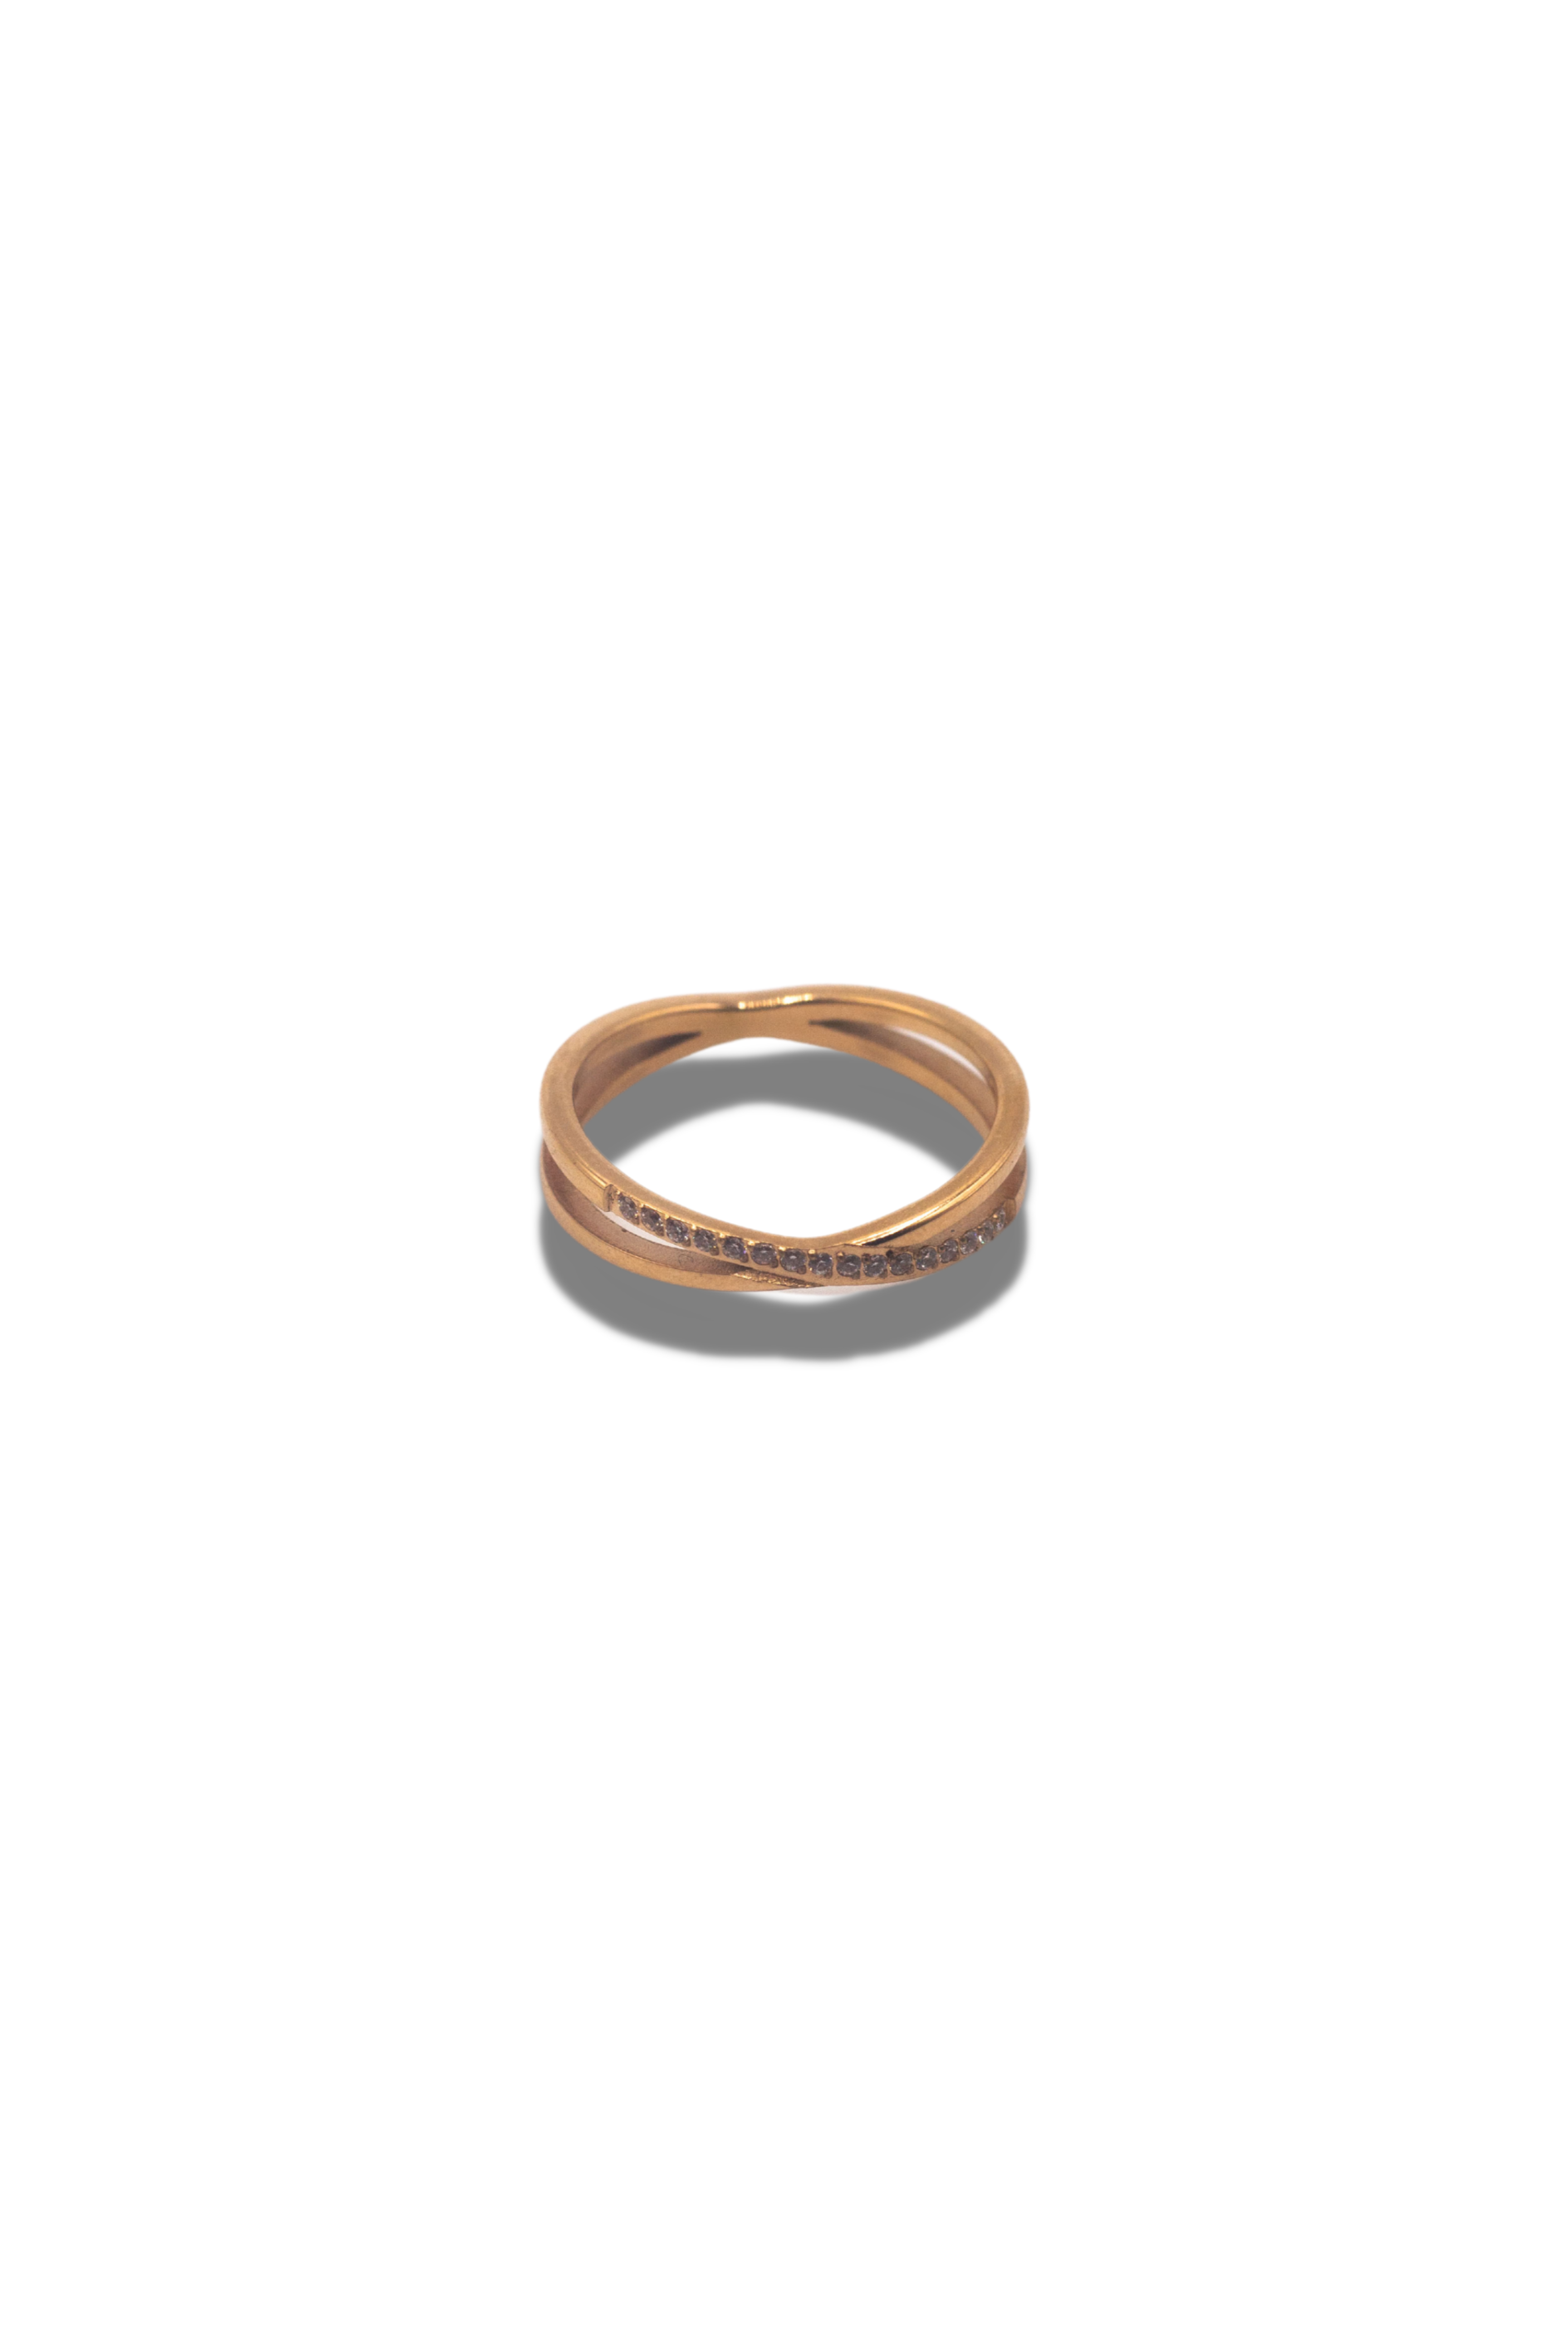 18k rose-gold stainless steel ring. Criss Cross Cubic Zirconia Ring by E's Element.